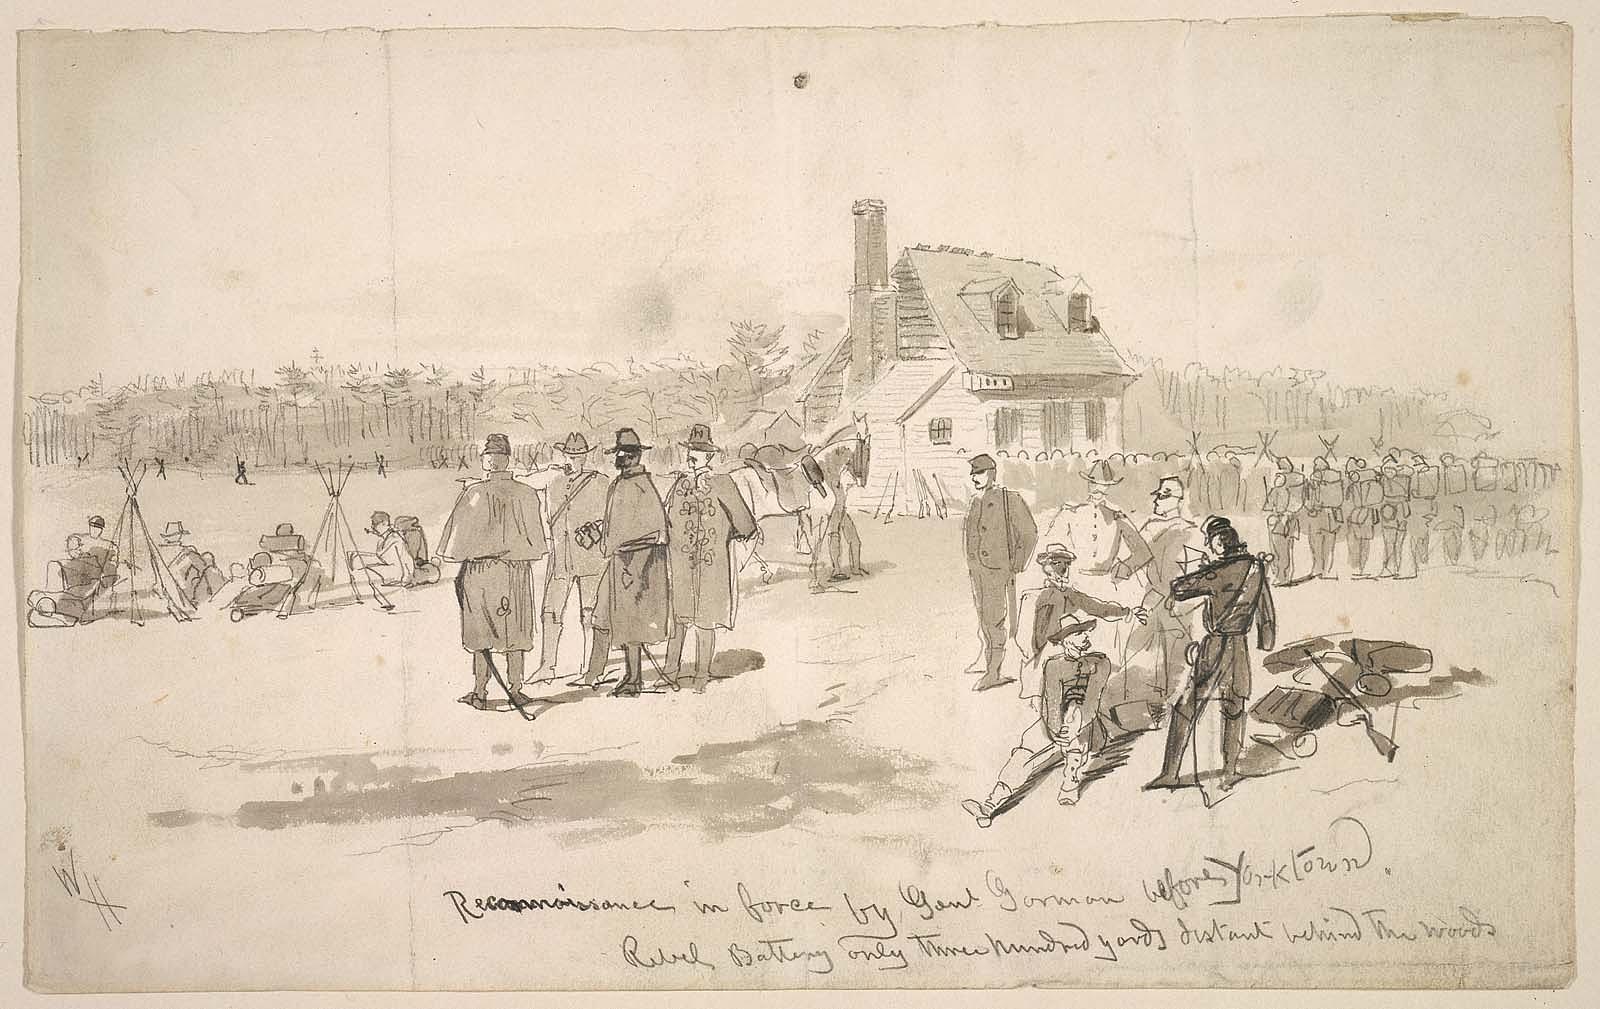 Winslow Homer, <em>Reconnaissance in force by General Gorman before Yorktown</em>, 1862, graphite with brush and gray wash on cream wove paper, 21 x 33.7 cm (<a href="https://collections.mfa.org/objects/761/reconnaissance-in-force-by-general-gorman-before-yorktown;ctx=83dbd38f-43fc-462c-a83b-8cd68fc1aa71&amp;idx=5">Museum of Fine Arts, Boston</a>)